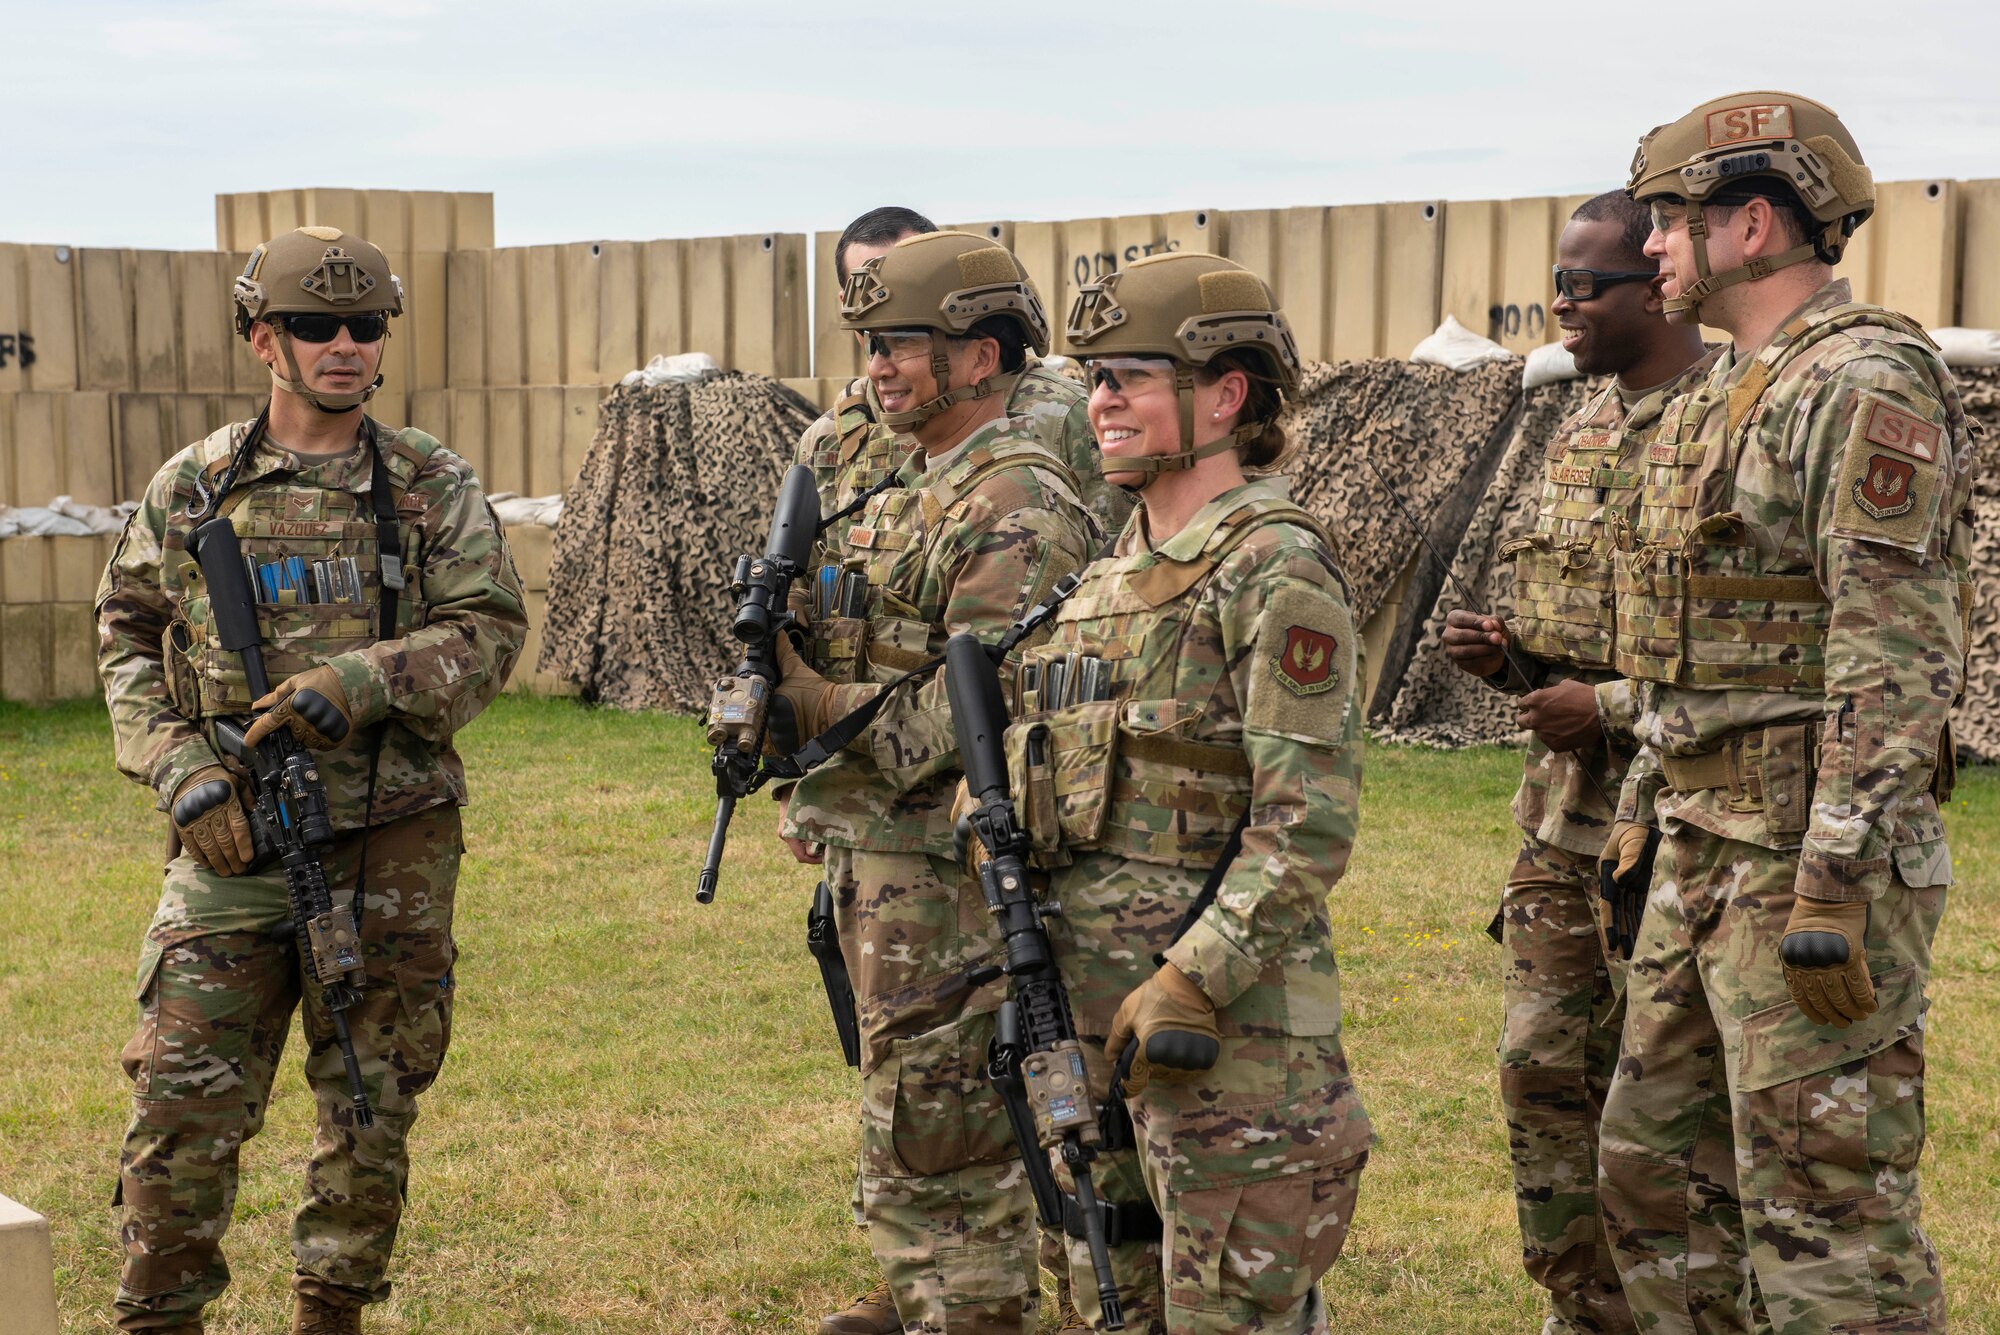 Chief Master Sgt. Kathi Glascock, center, 100th Air Refueling Wing command chief, and Col. Troy Pananon, second left, 100th ARW commander, observe and participate in 100th Security Forces Squadron’s advanced shoot, move and communicate training Aug. 30, 2019, on RAF Mildenhall, England. Glascock arrived at RAF Mildenhall in June 2019 and has hit the ground running, getting out to work centers around base, meeting Airmen and talking with them to see what issues they may have and how she can help make their lives better. (U.S. Air Force photo by Senior Airman Luke Milano)